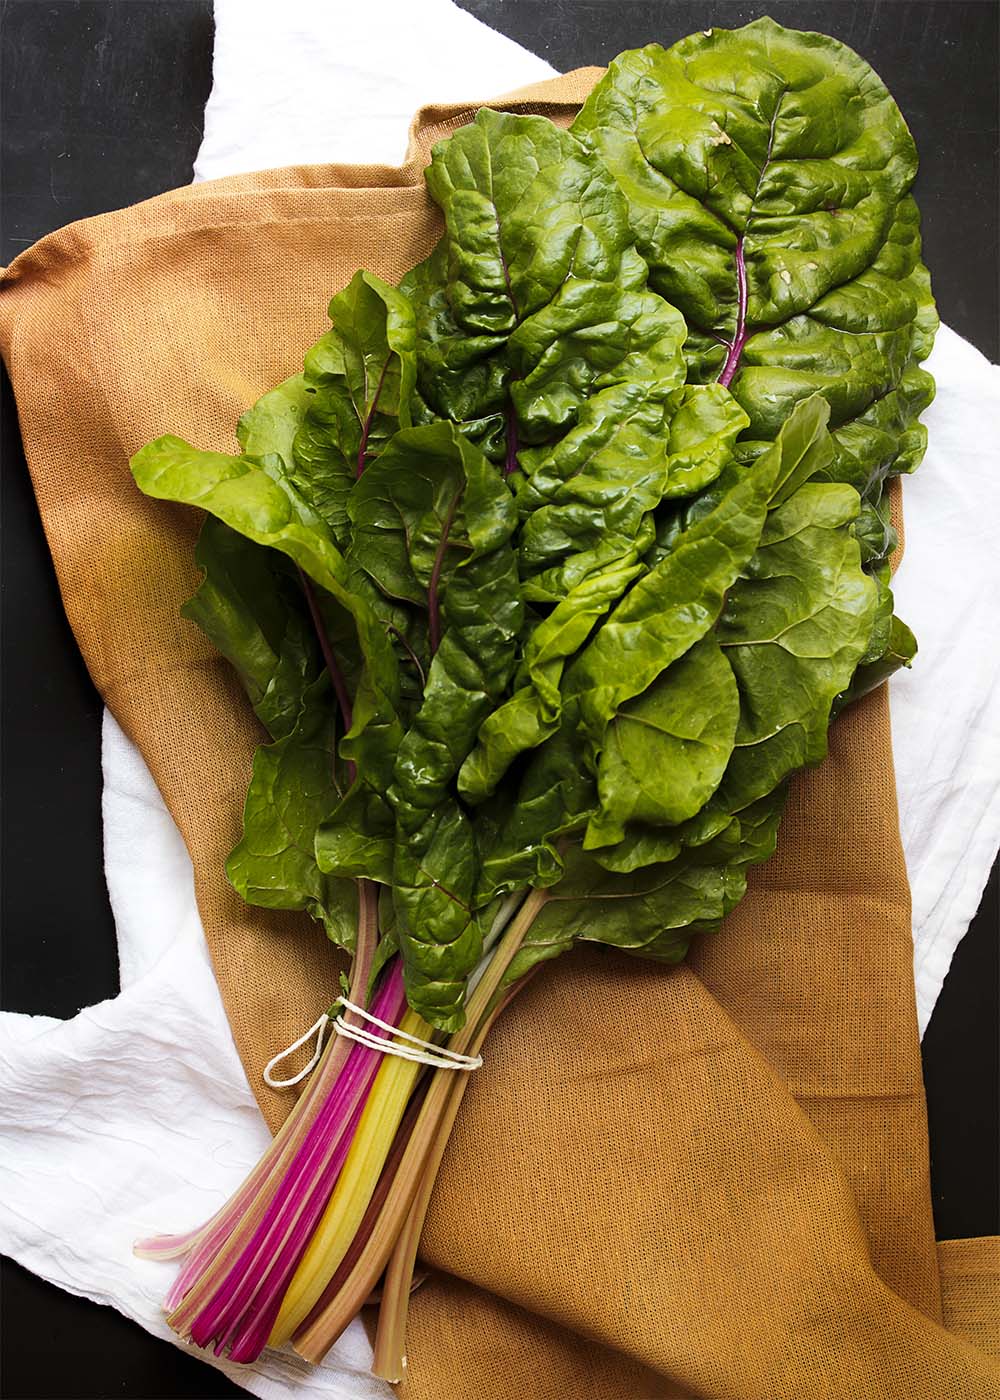 Ingredient Spotlight: Swiss Chard - Swiss chard is a wonderful, hearty green that is great in soups, gratins, pastas, and many other recipes. Its flavor is a cross between spinach and beets and you'll love cooking with it once you give it a try. | justalittlebitofbacon.com